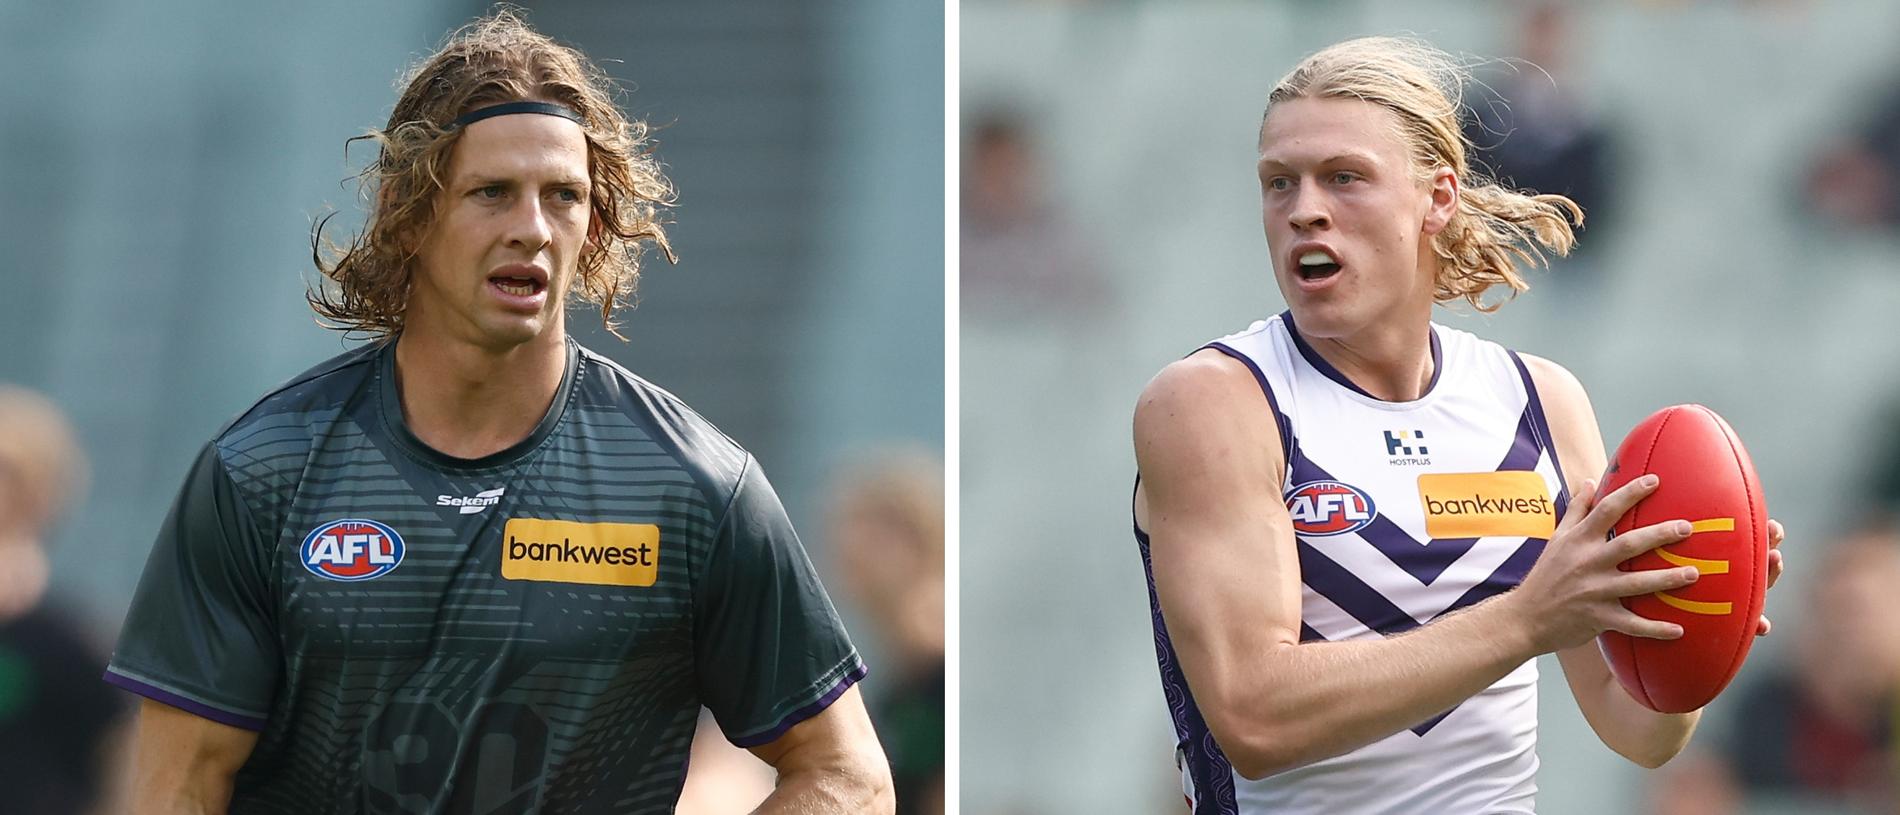 Fremantle's "heir apparent" for Nat Fyfe is Hayden Young, according to Garry Lyon.